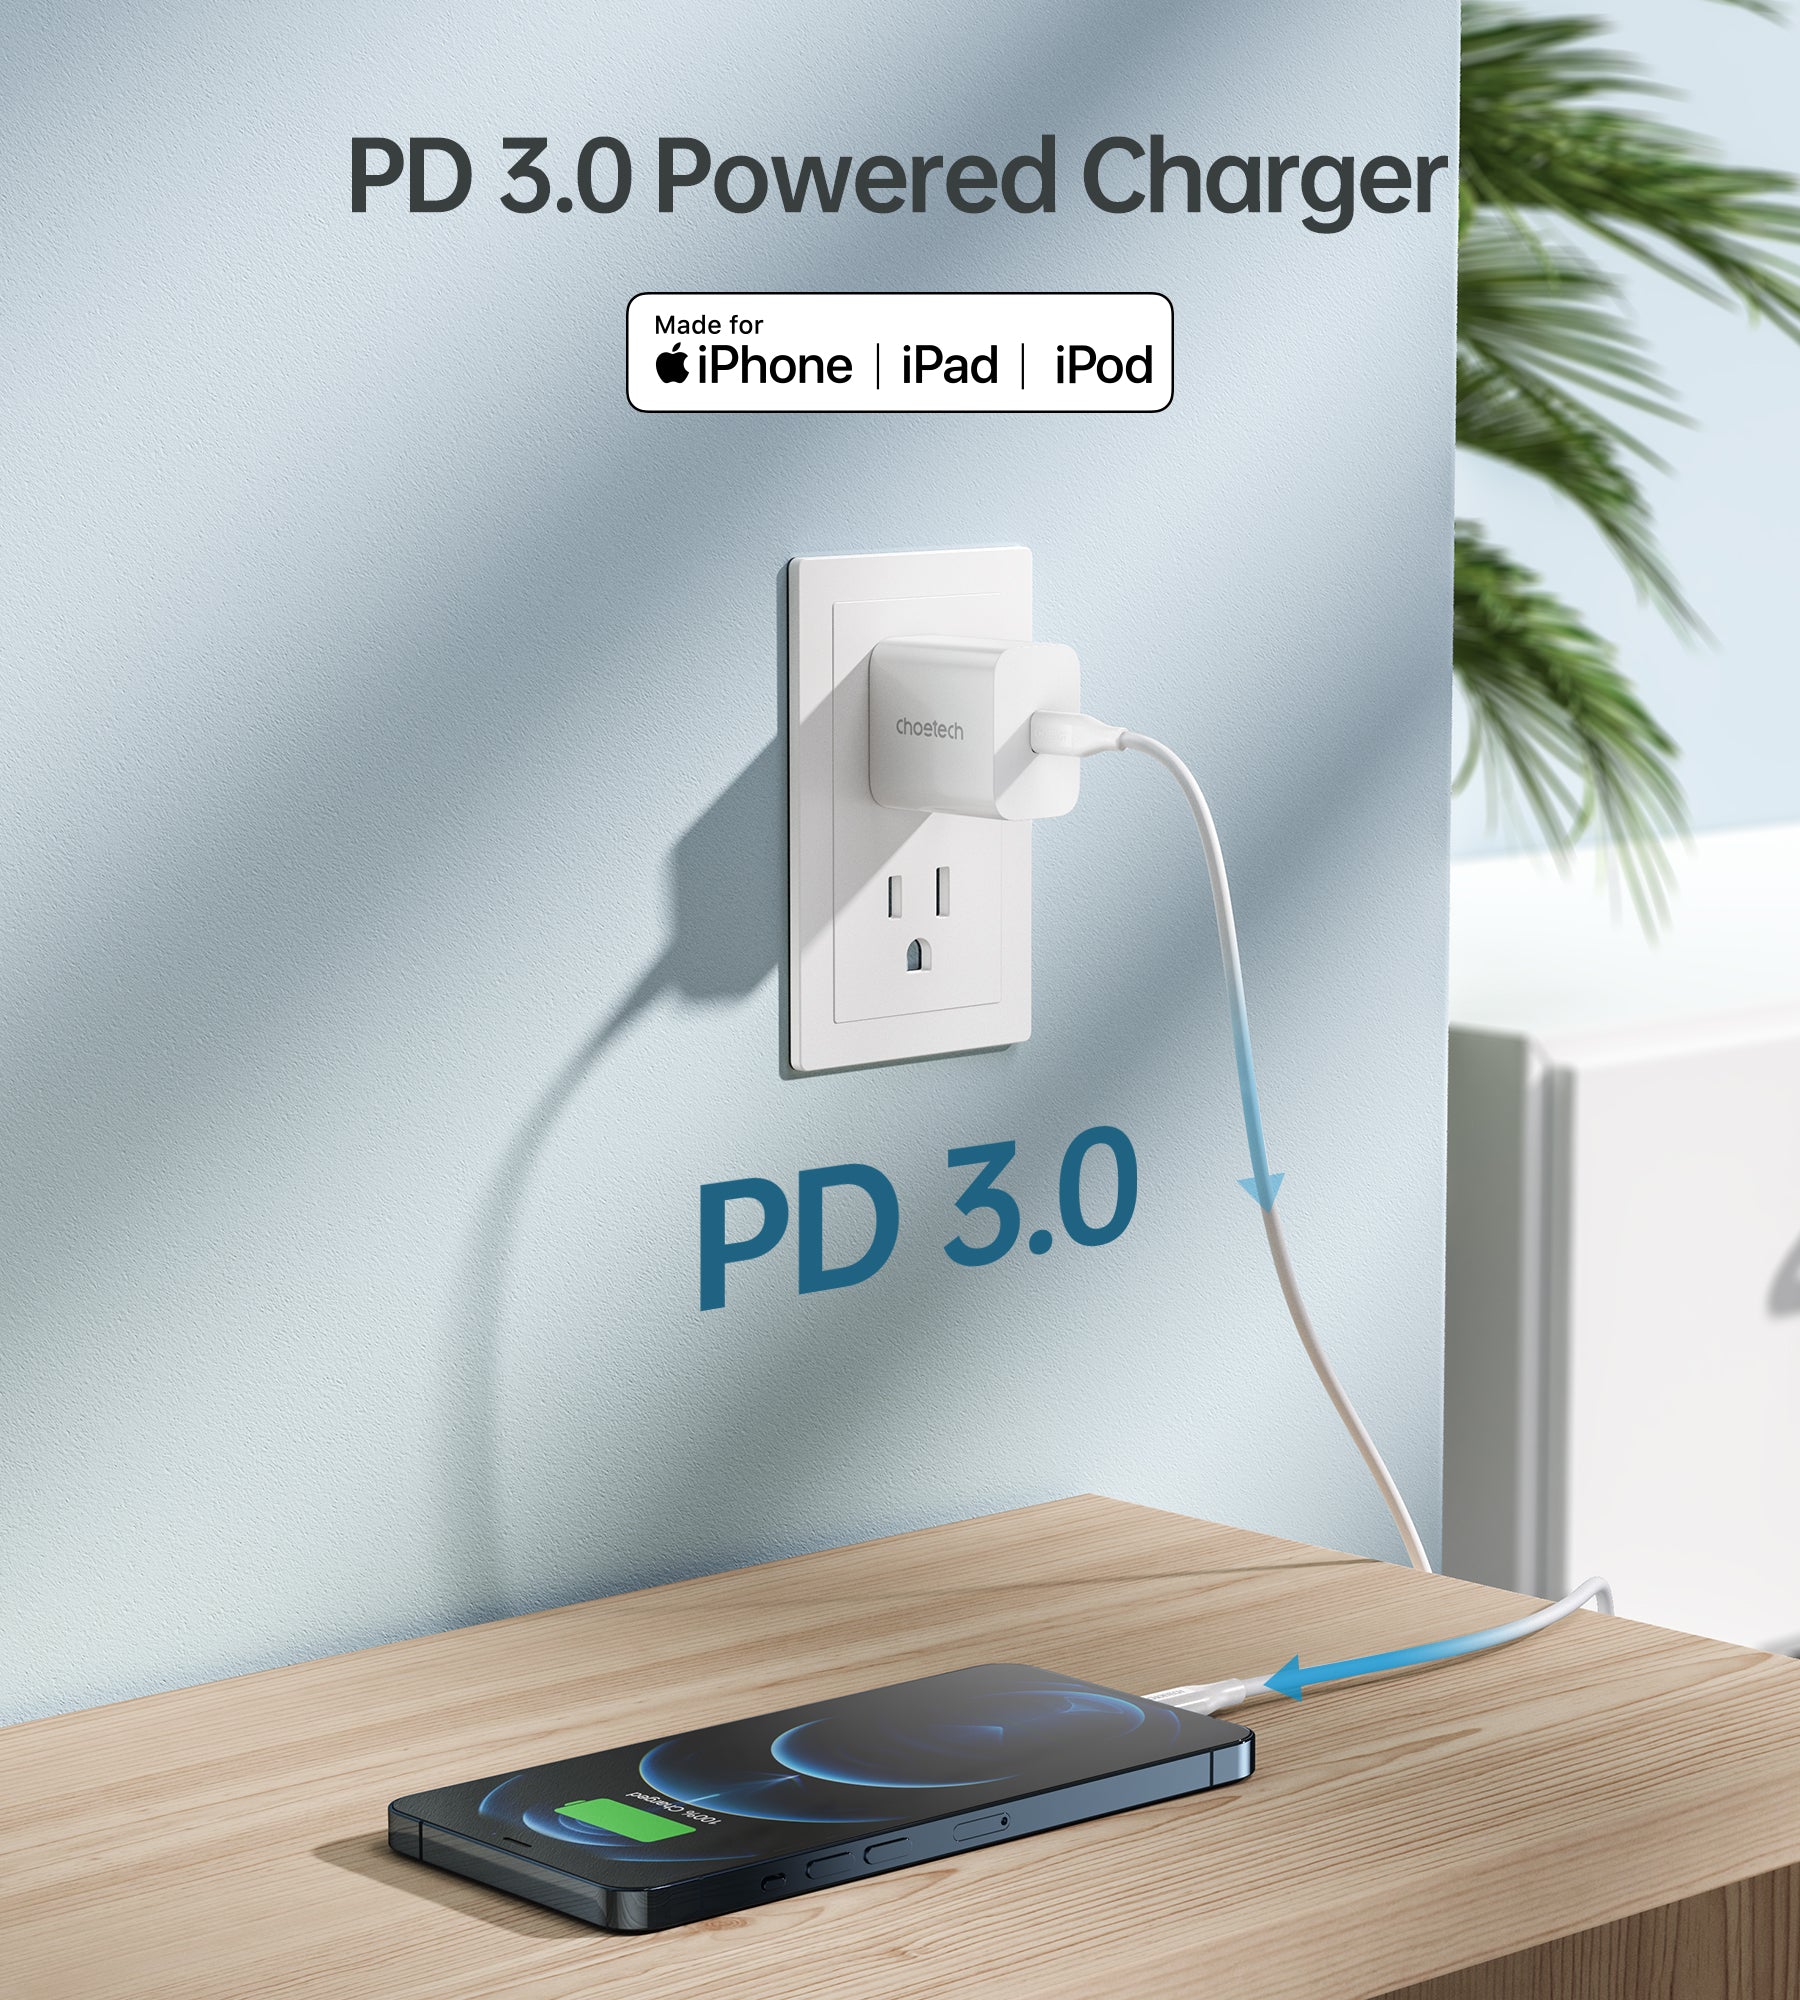 USB C Charger PD 20W Type C Wall Adapter 2 Pack Charger